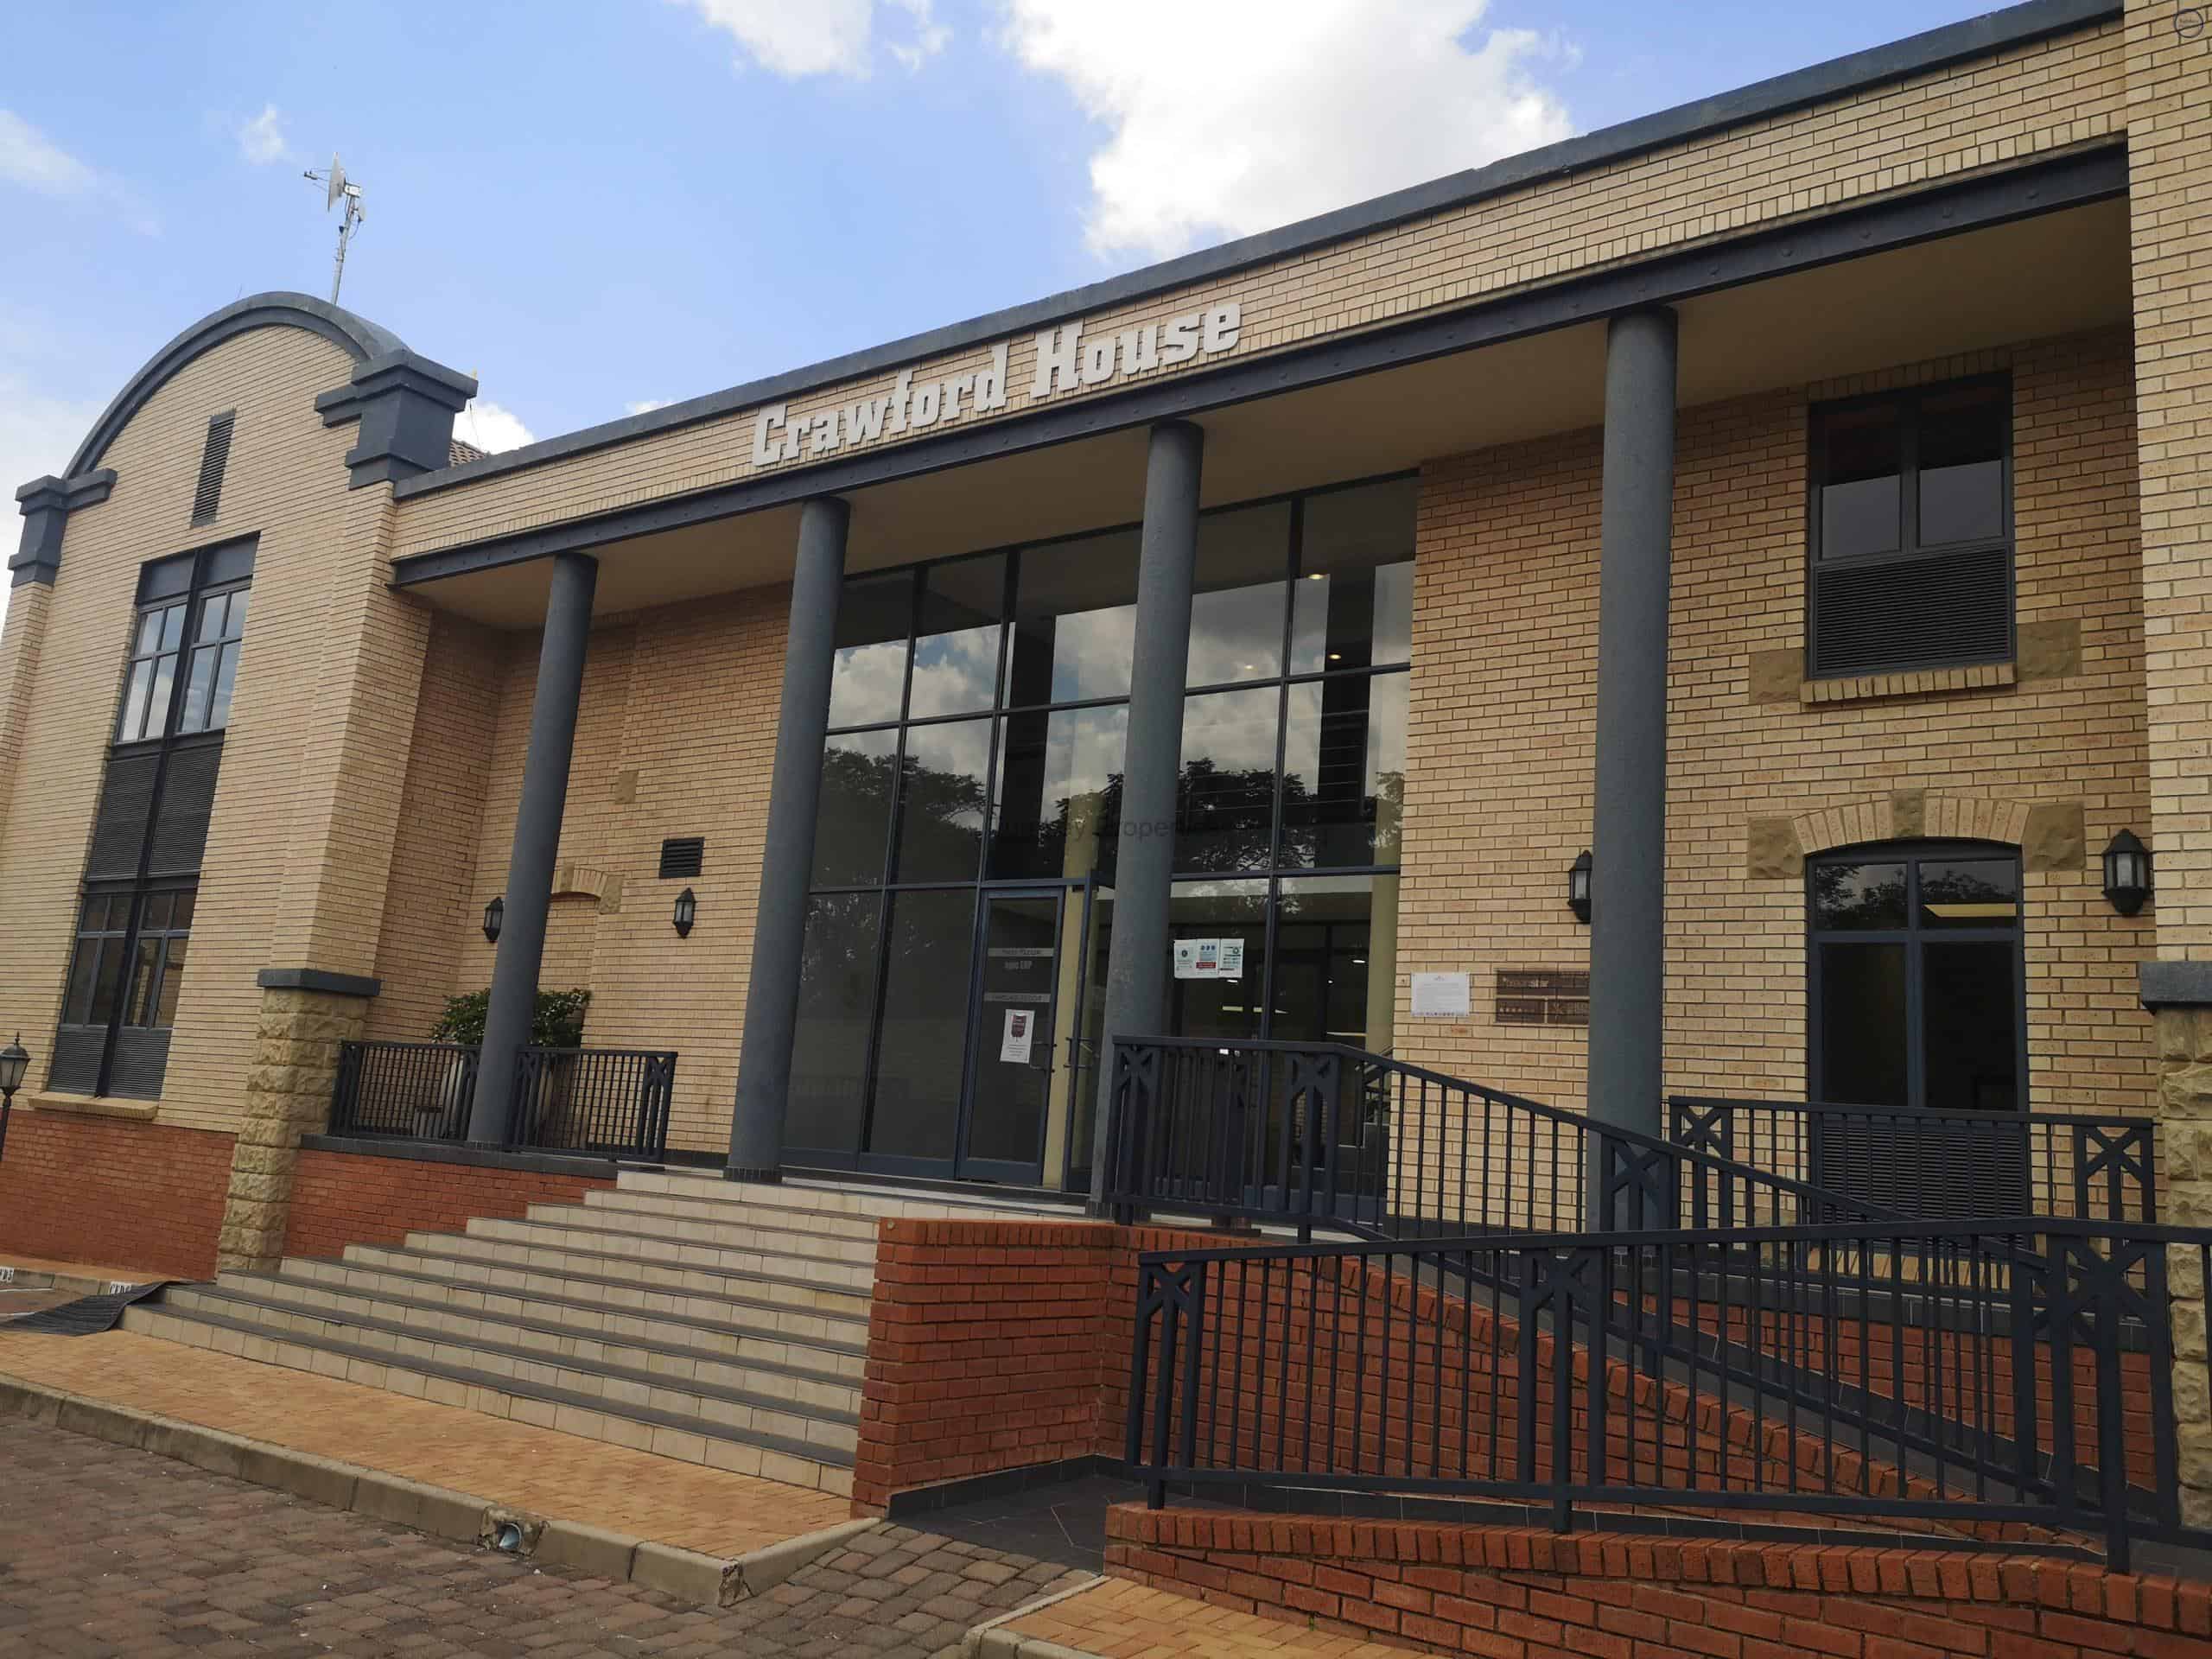 868m² Office Space to Rent Bryanston Crawford House